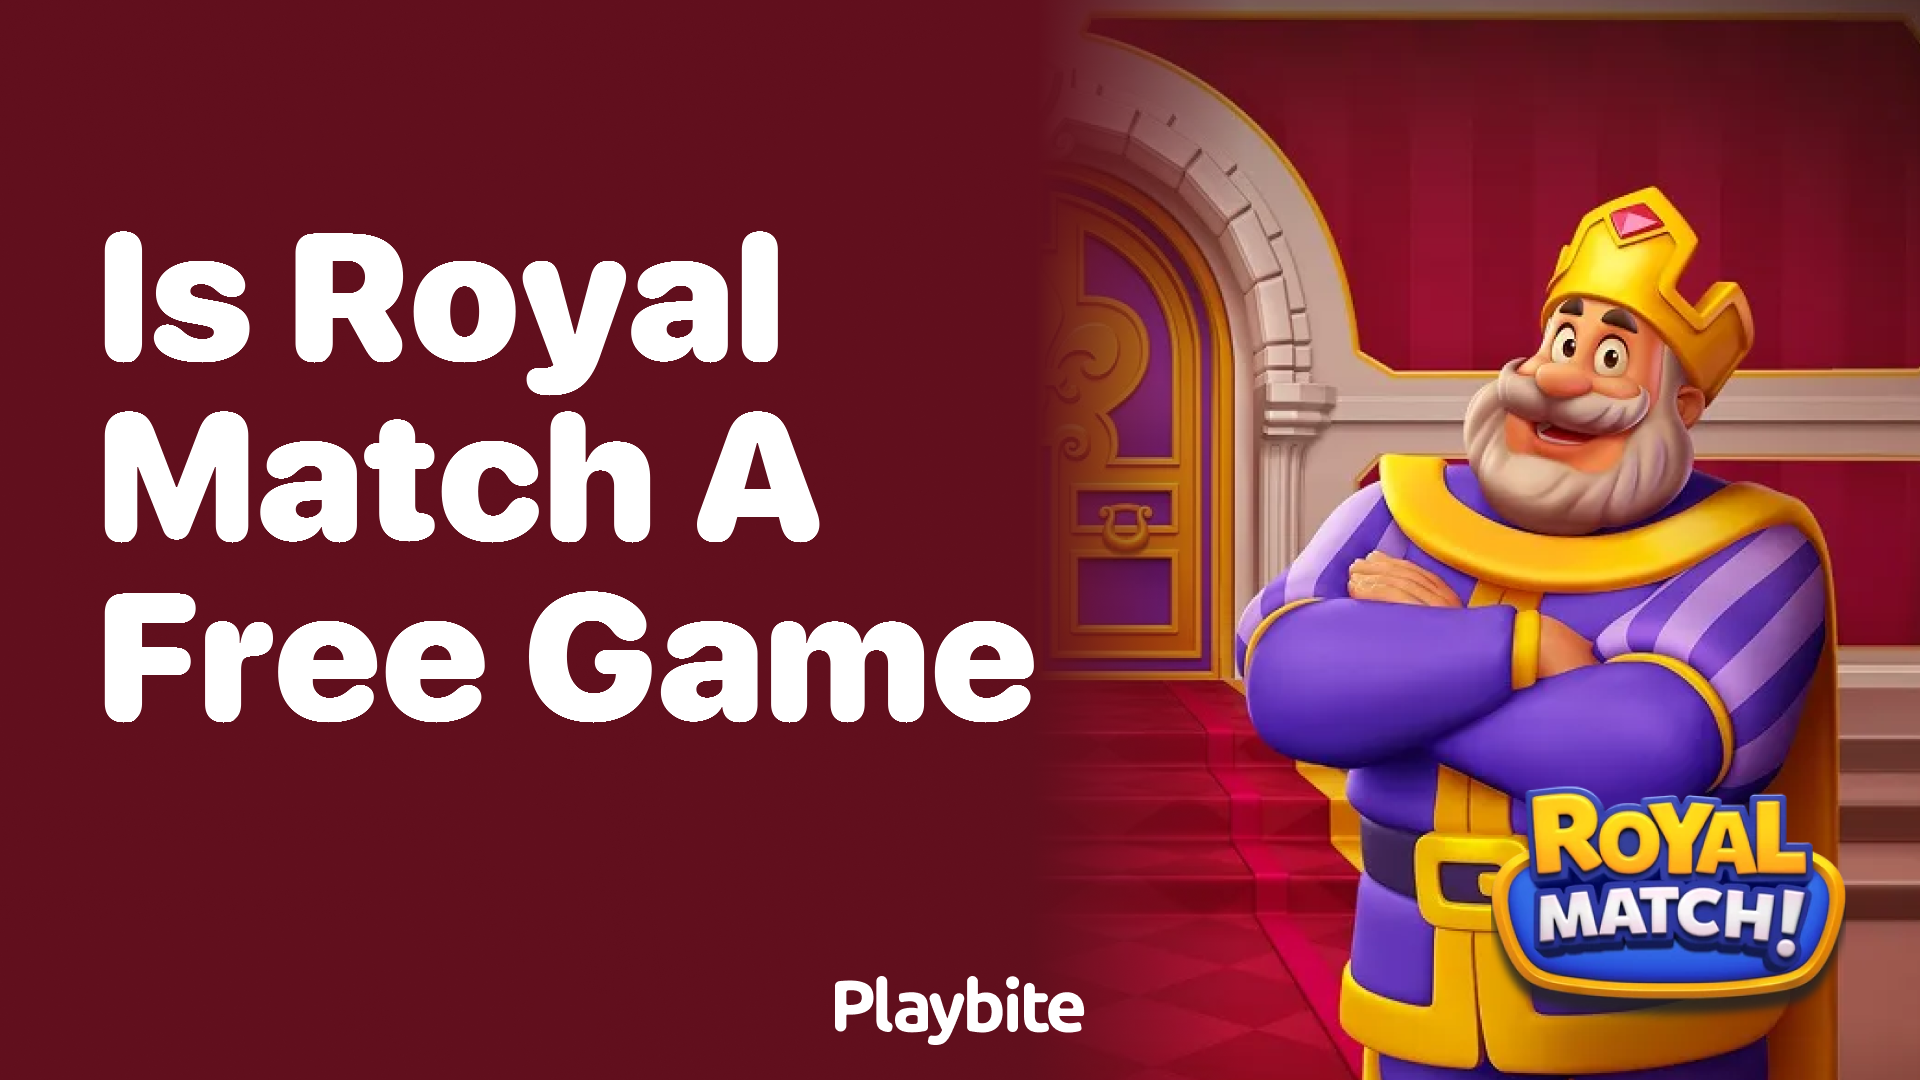 Is Royal Match a Free Game? Find Out Here!